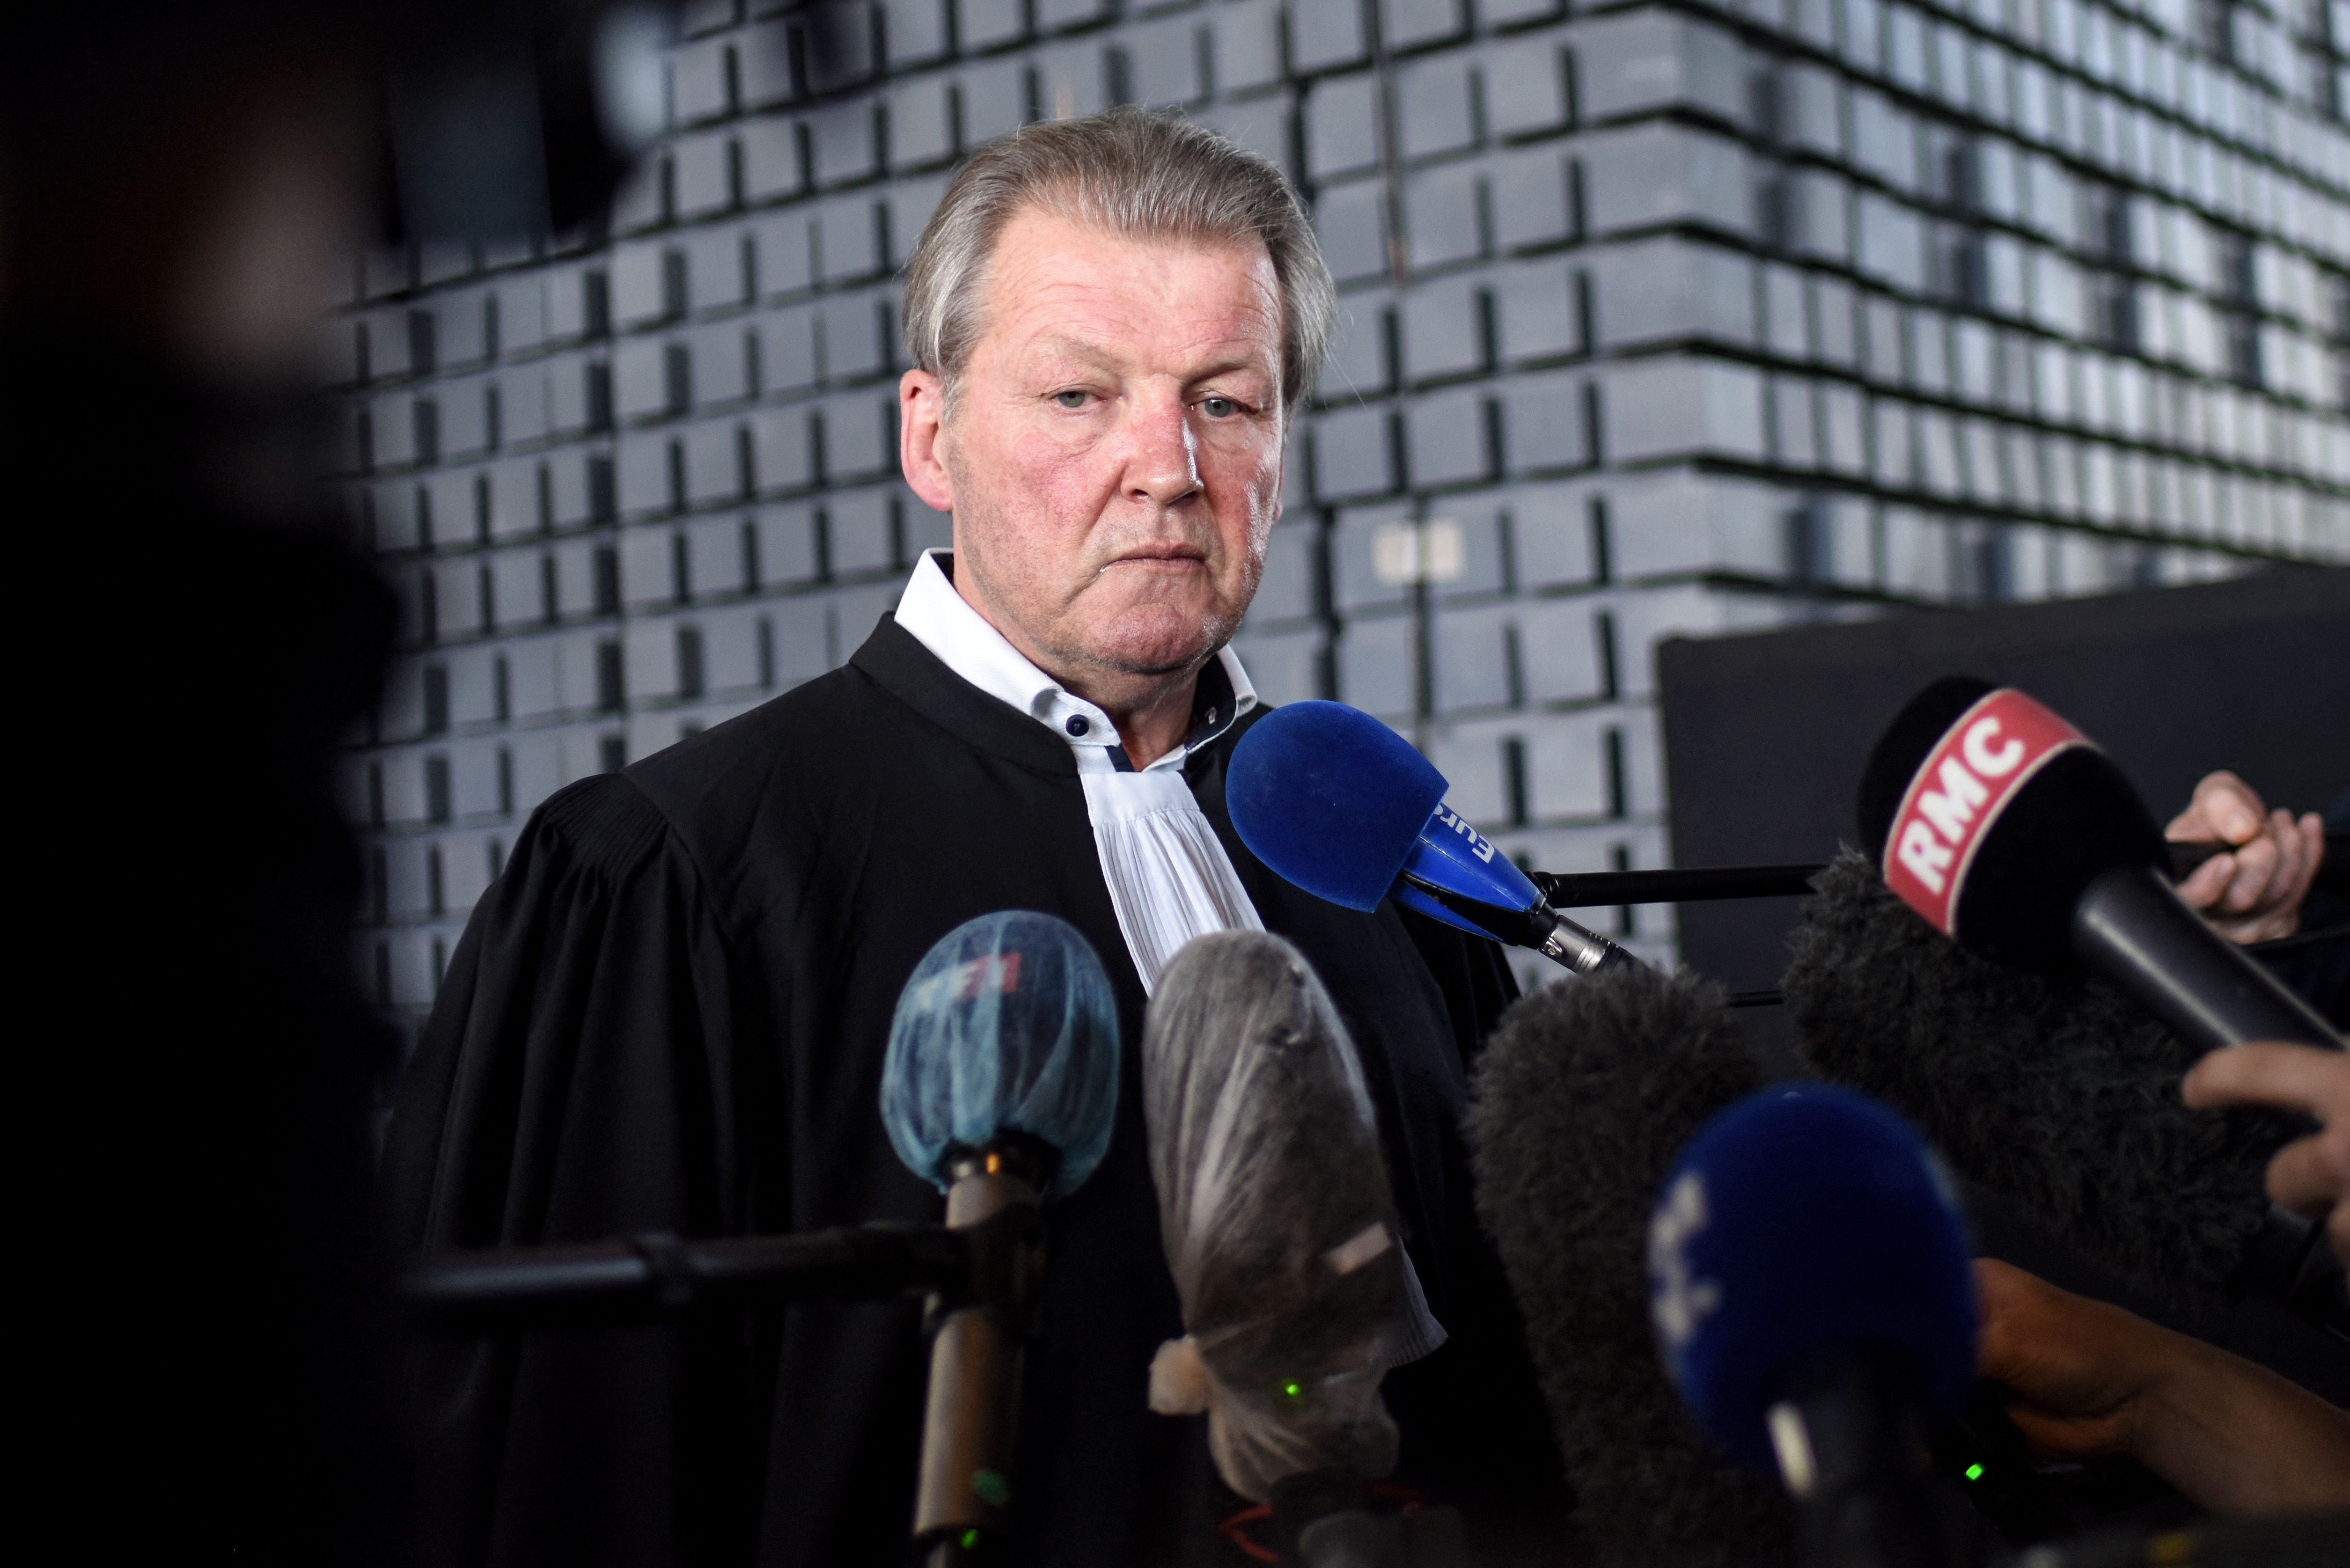 Patrick Larvor, lawyer of main accused Hubert Caouissin, talks to the press at Nantes’ courthouse, western France, on 7 July, 2021, during a break on the last day of the trial of the so-called “Troadec case” which started on 22 June, 2021. - The family members were killed on 16 February, 2017 in Orvault.